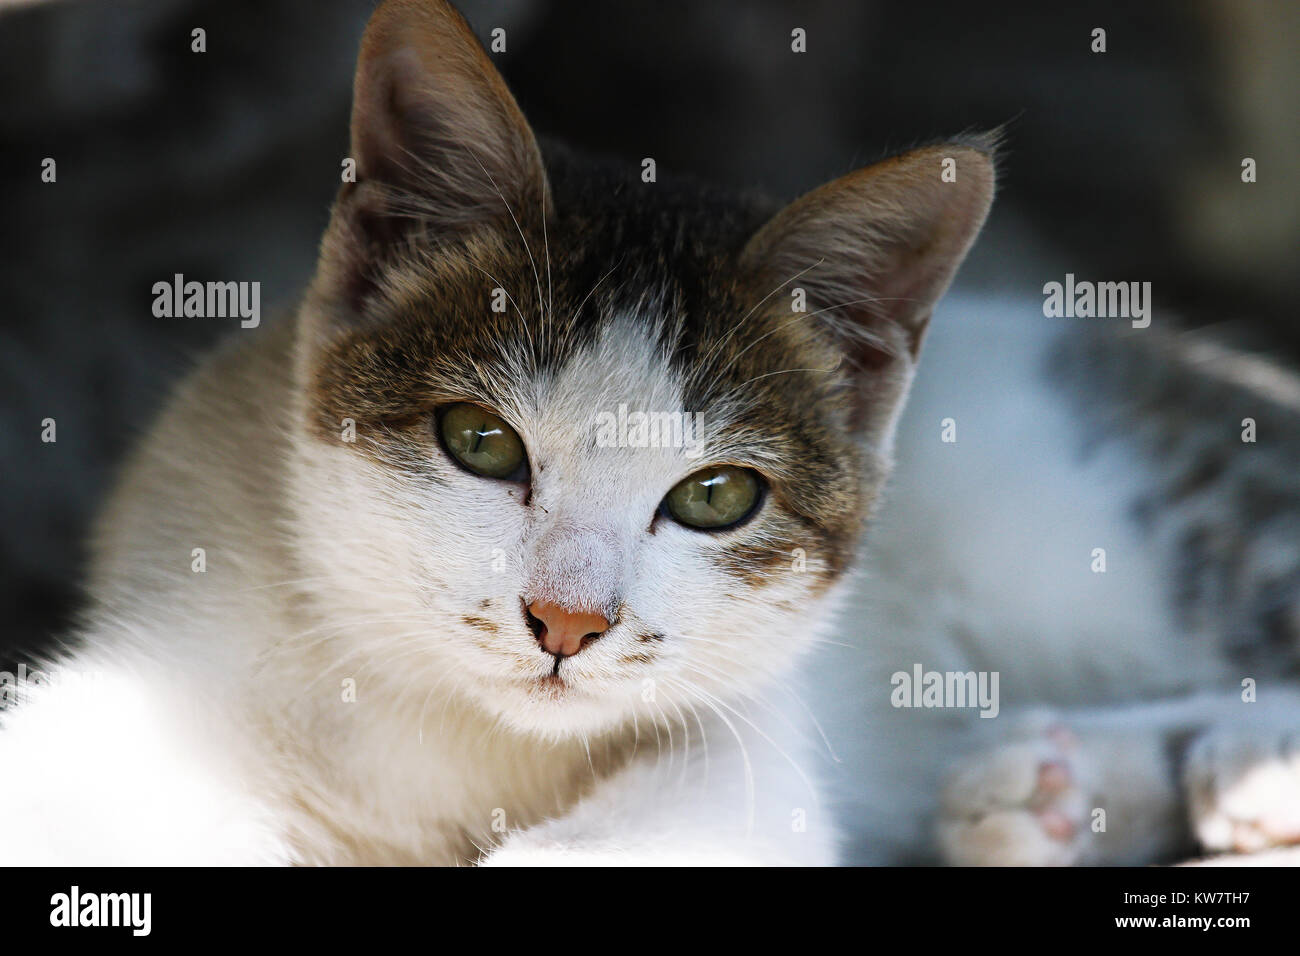 Grey-white curious Cat with green eyes and pink nose looking straight at camera Stock Photo